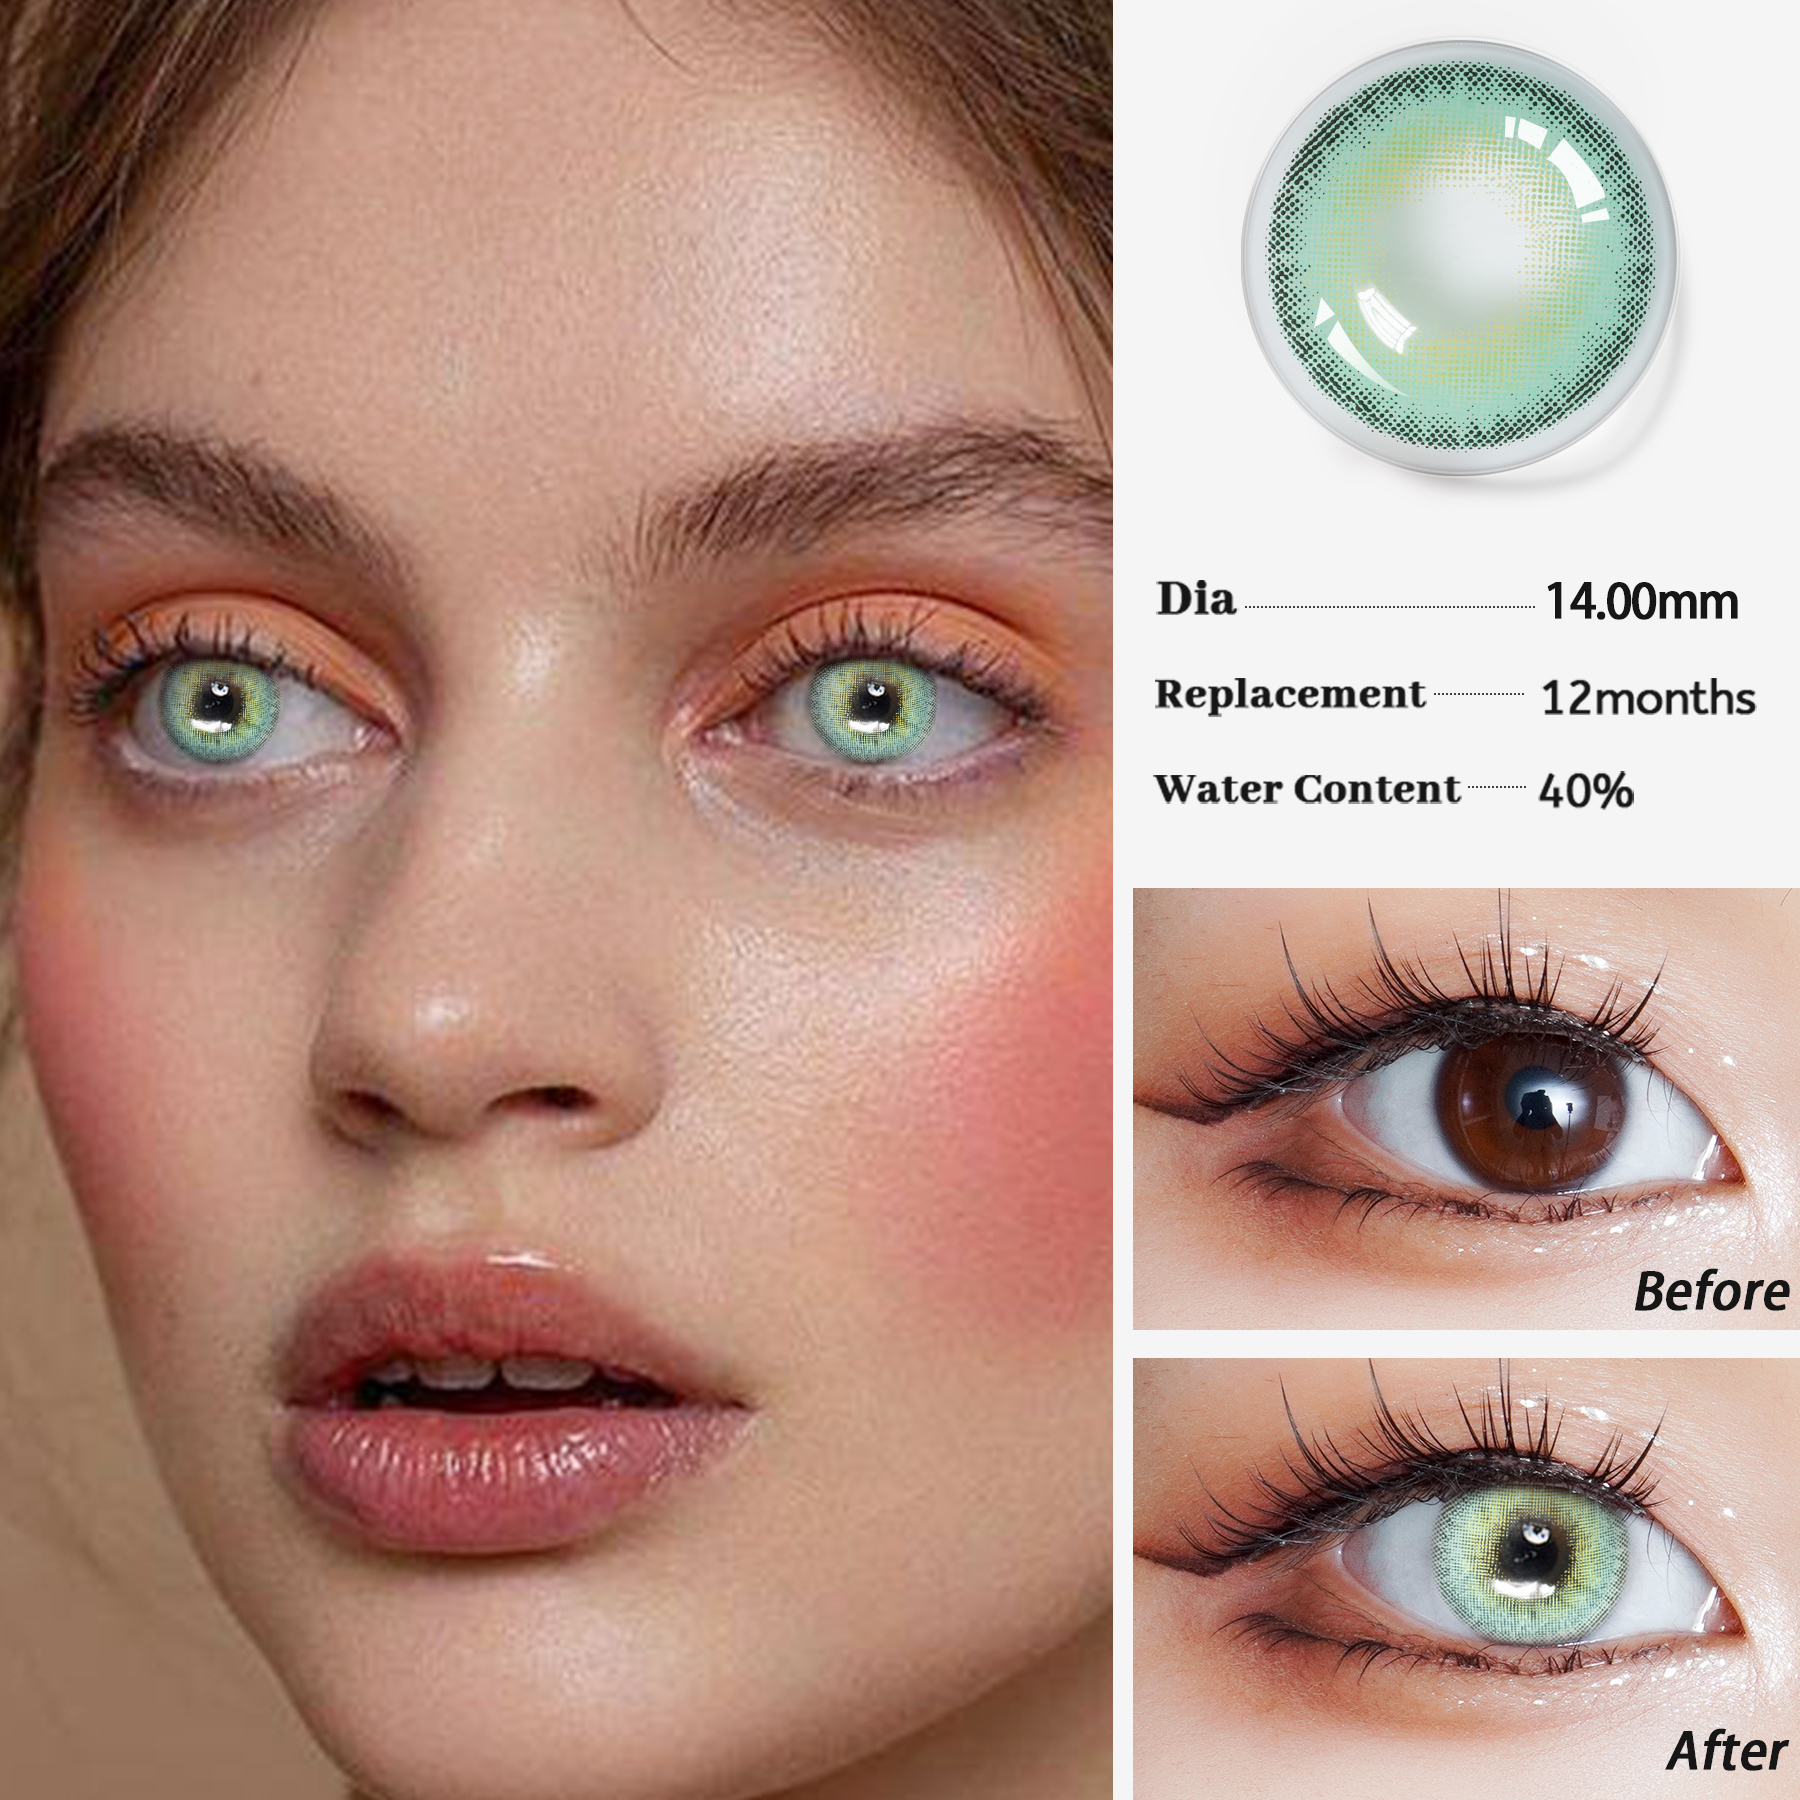 CLASSICAL Tinted Contact Lenses Shadow Color Collection Annual Natural Color Contact Lenses Fast Delivery